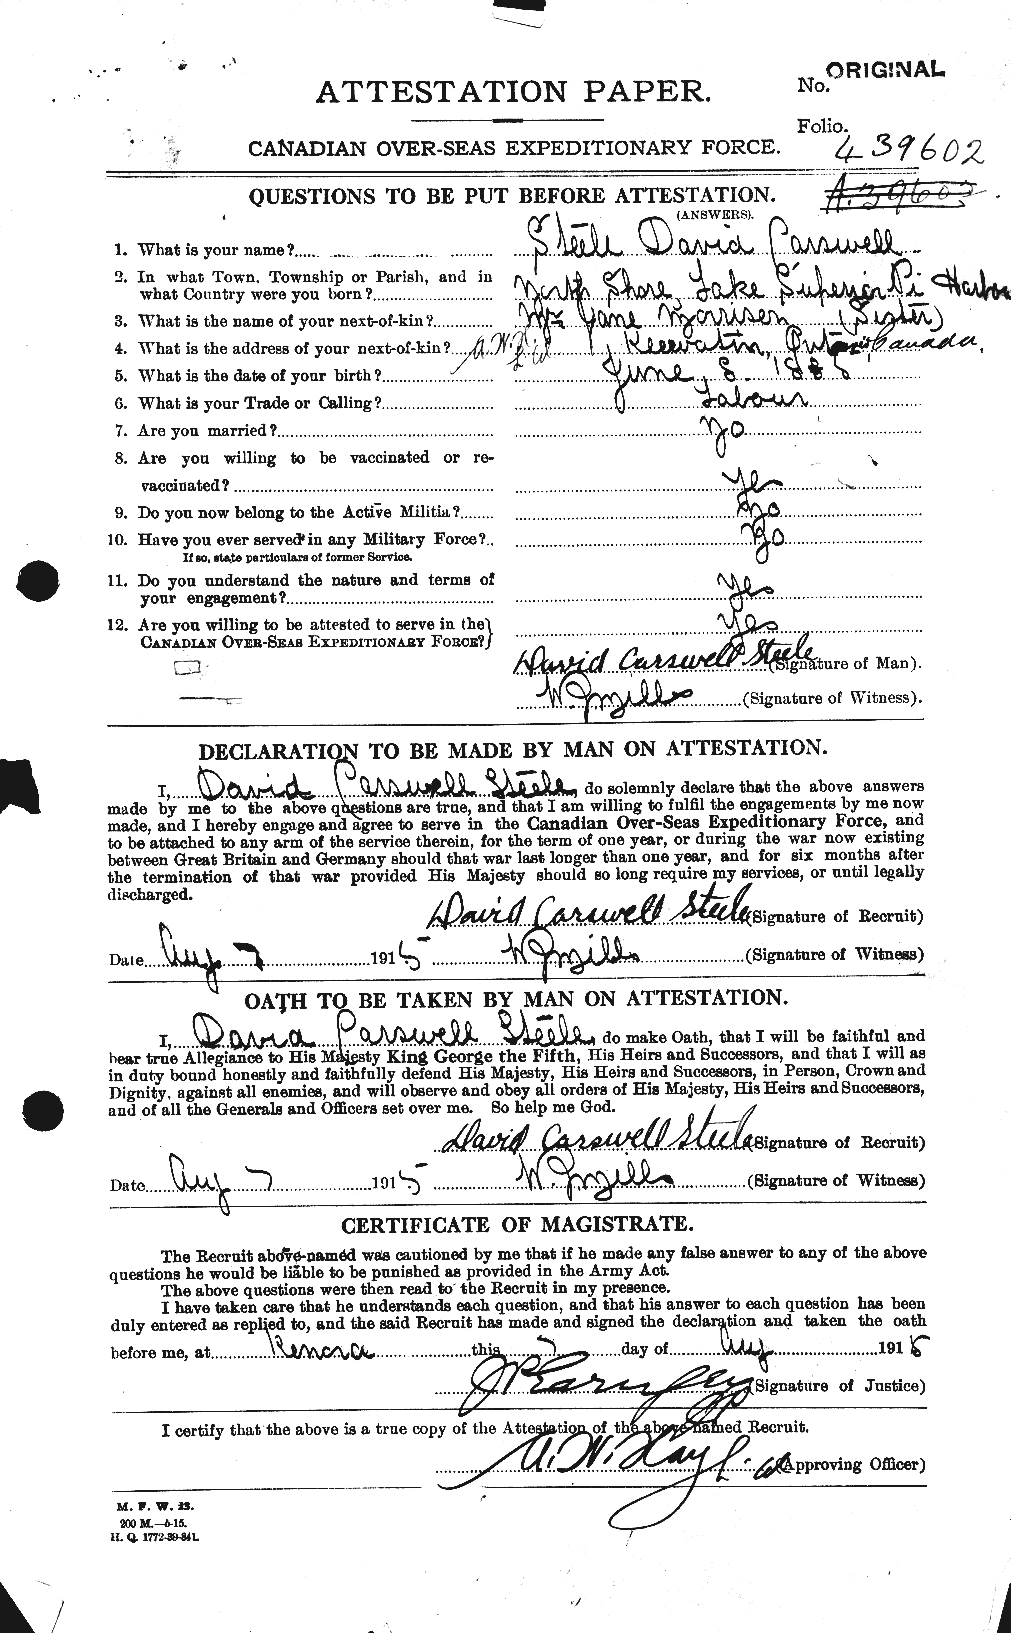 Personnel Records of the First World War - CEF 116205a